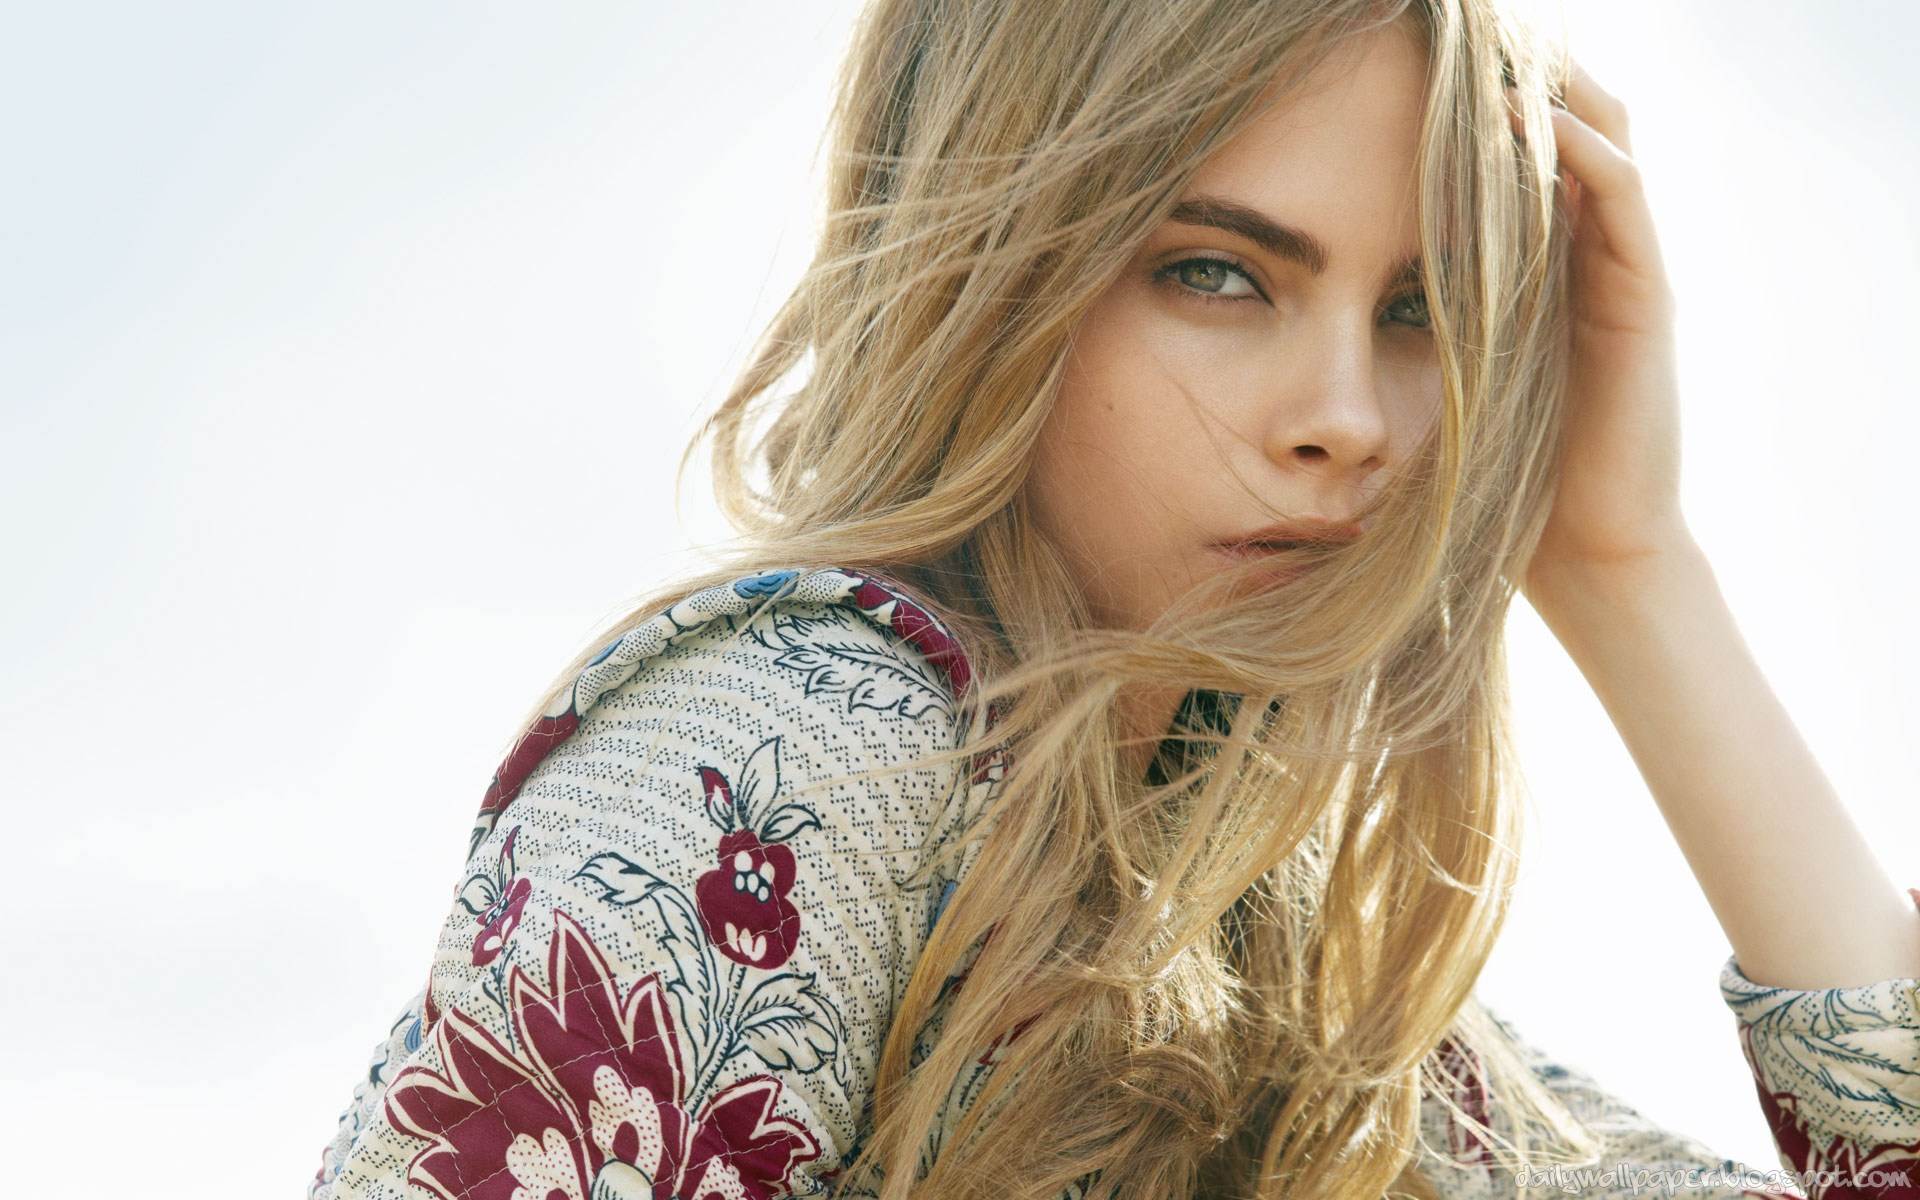 Cara Delevingne Backgrounds - Wallpaper, High Definition, High Quality